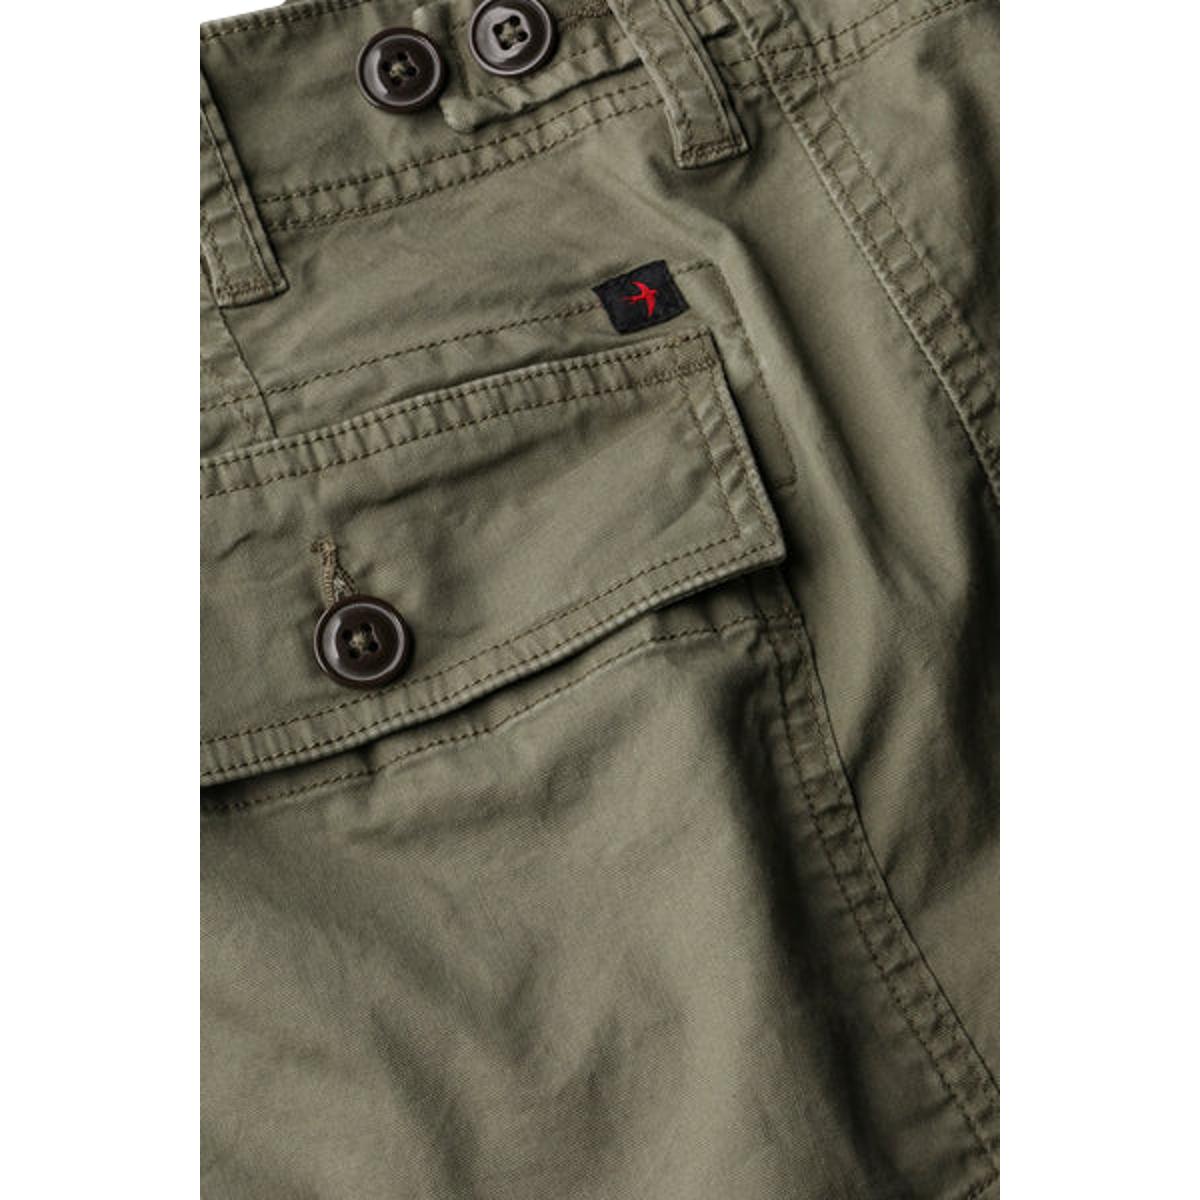 Canvas Supply Pant Olive Drab - Fatigue